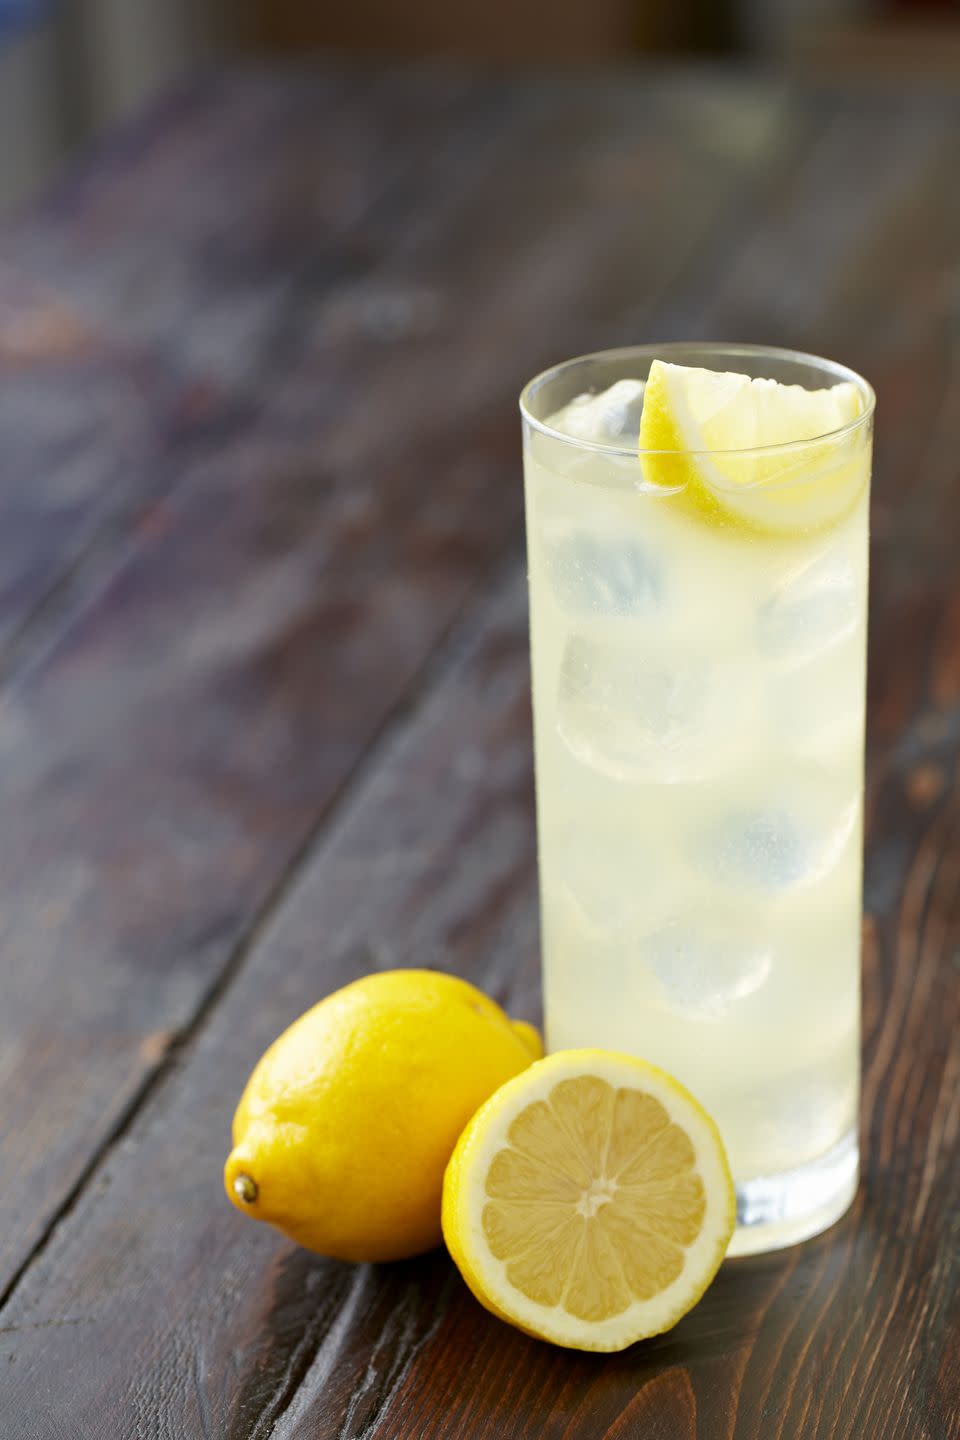 The Master Cleanse (lemonade cleanse)